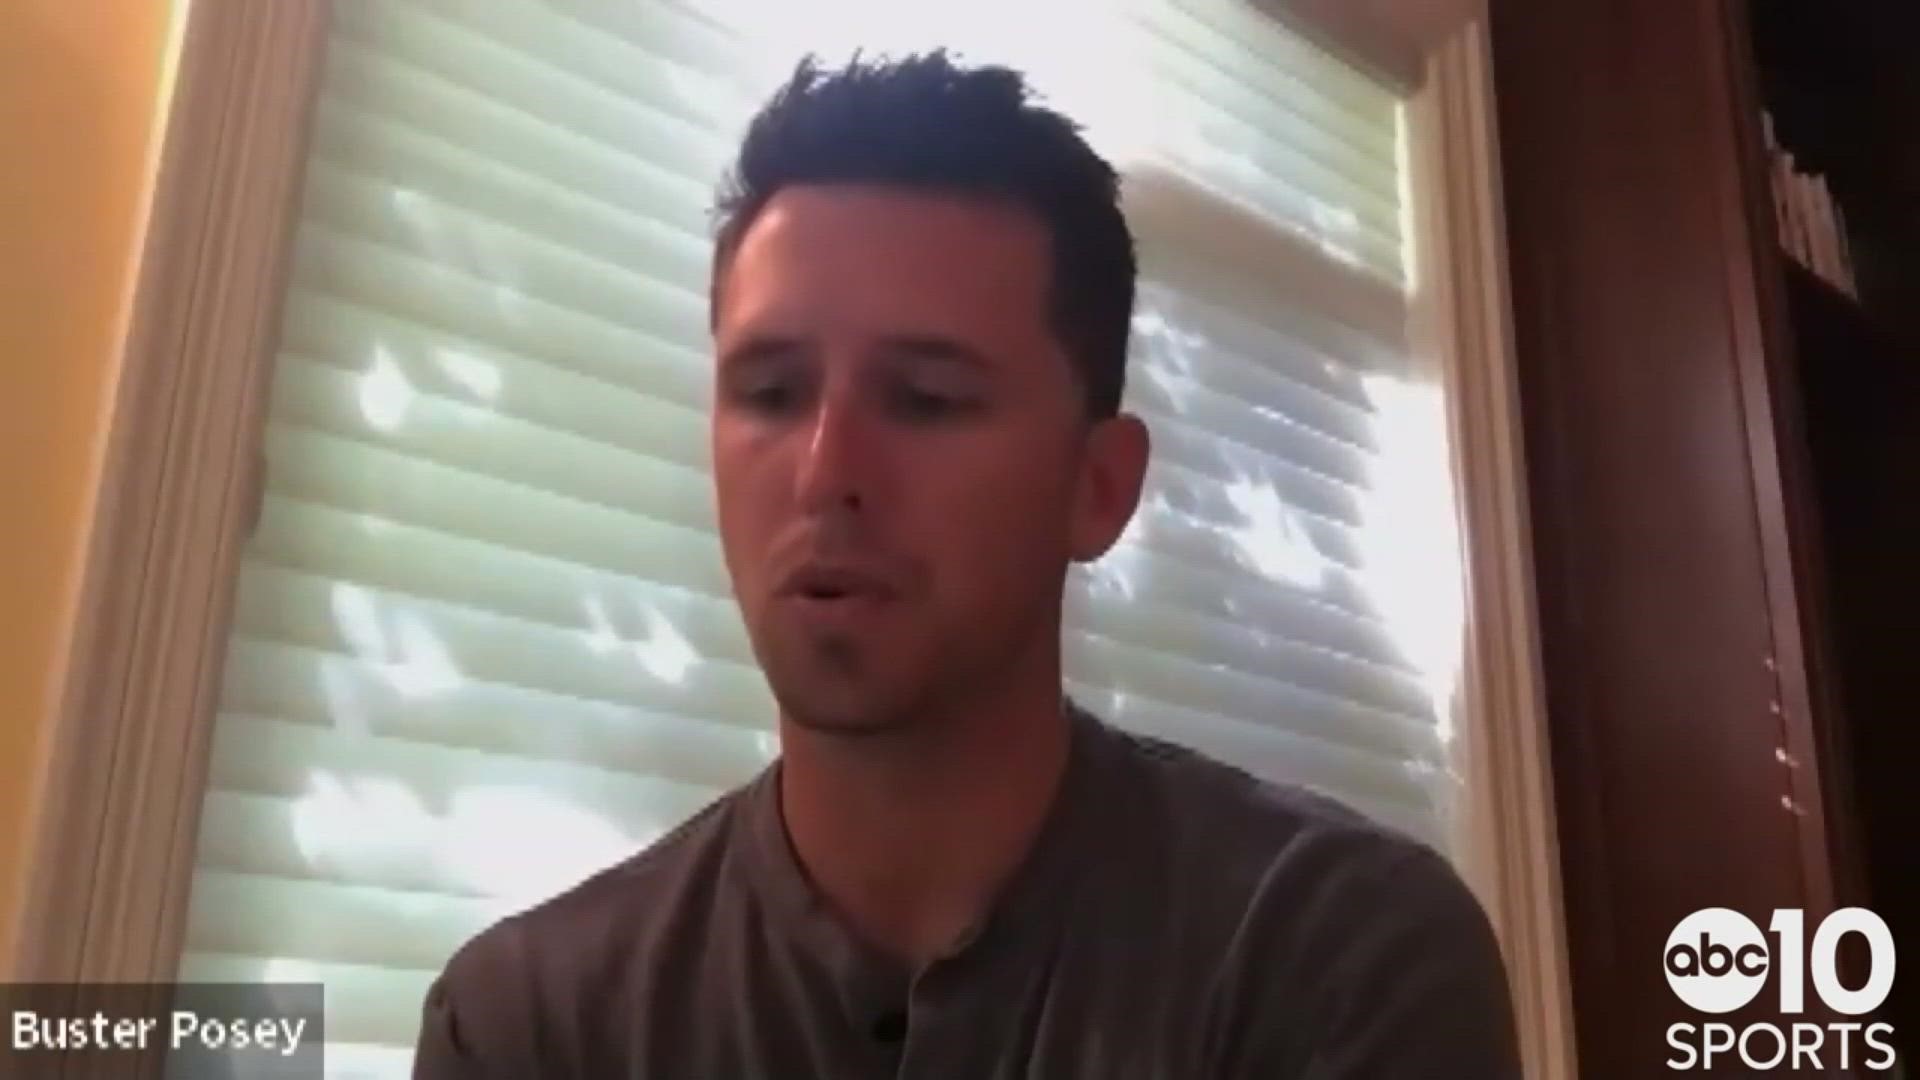 Will Buster Posey be the next manager of the SF Giants?